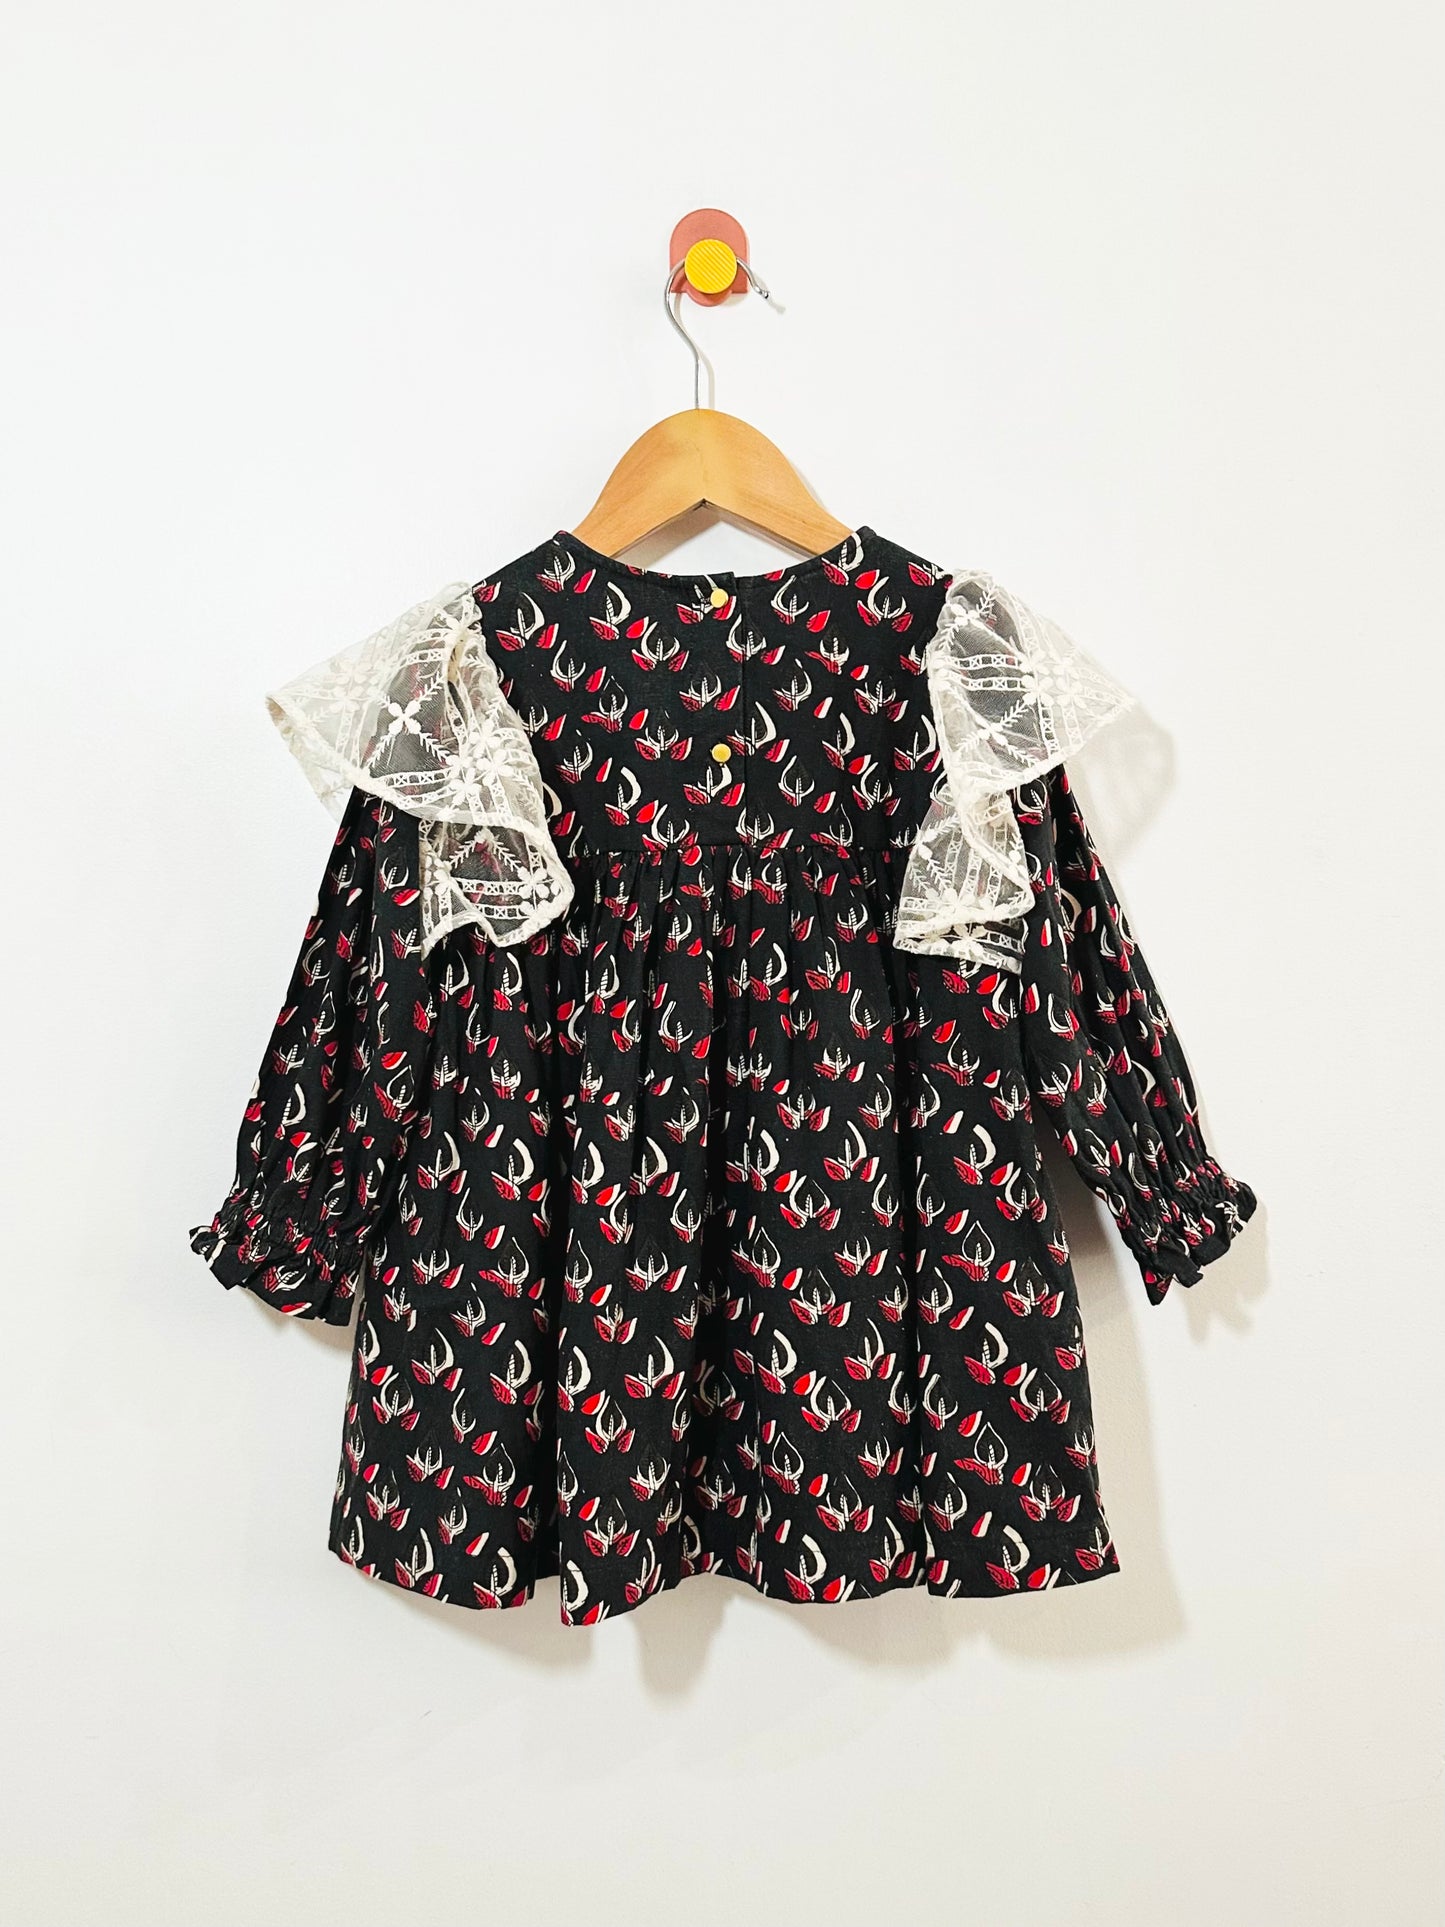 Lulaland Feather Lace Dress / 2T